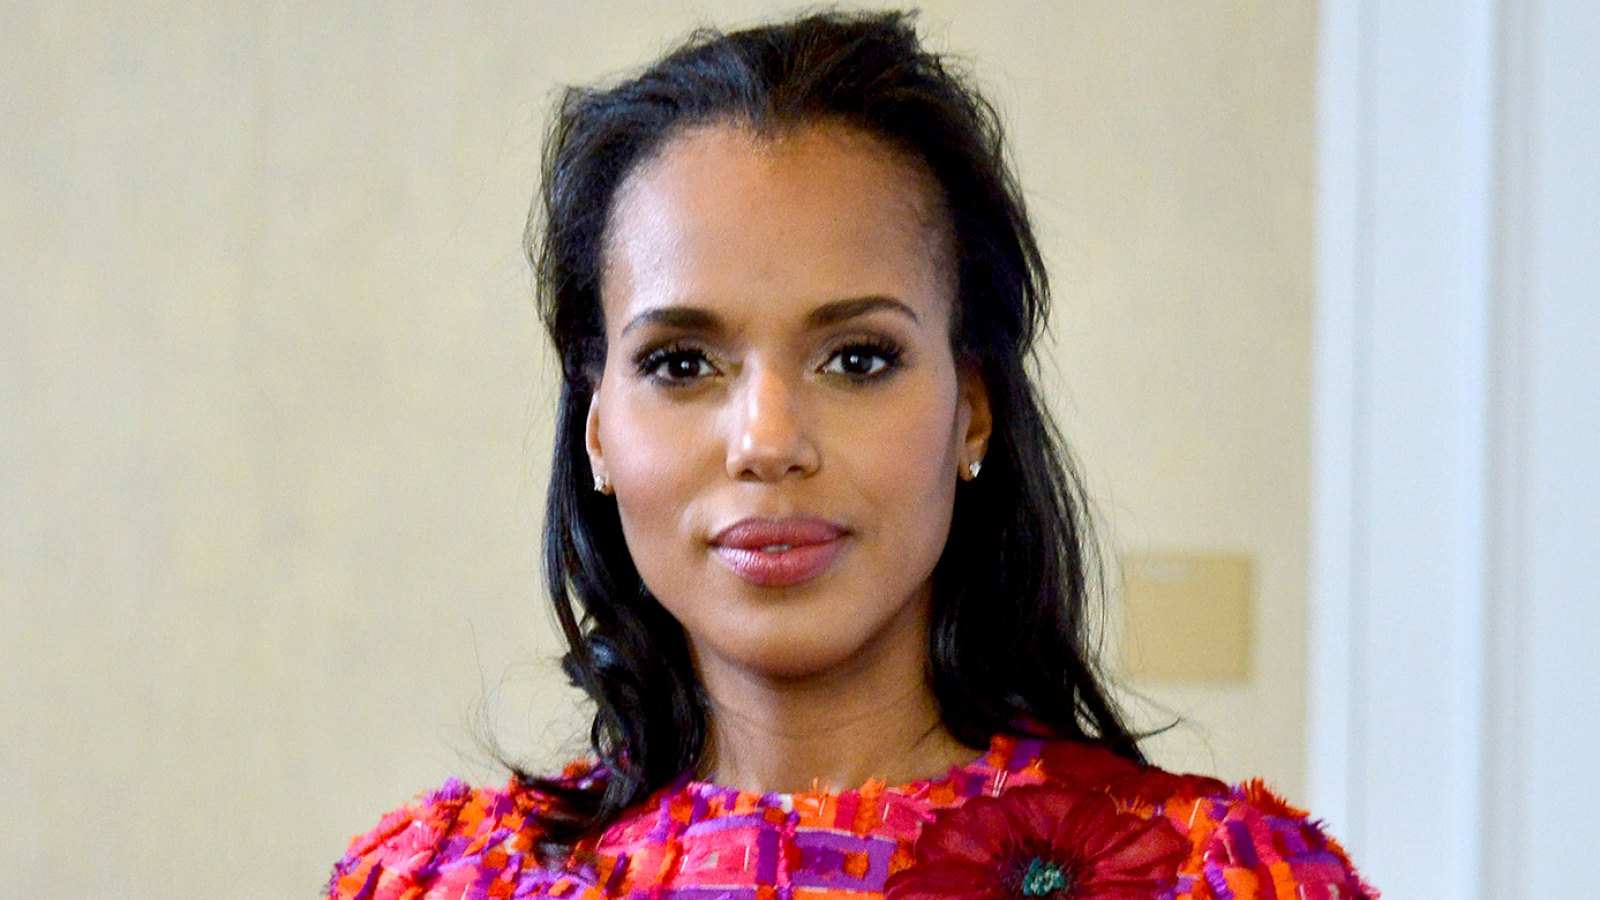 Kerry Washington attends the United Way of Greater Los Angeles Women's Summit on April 25, 2016 in Beverly Hills, California.